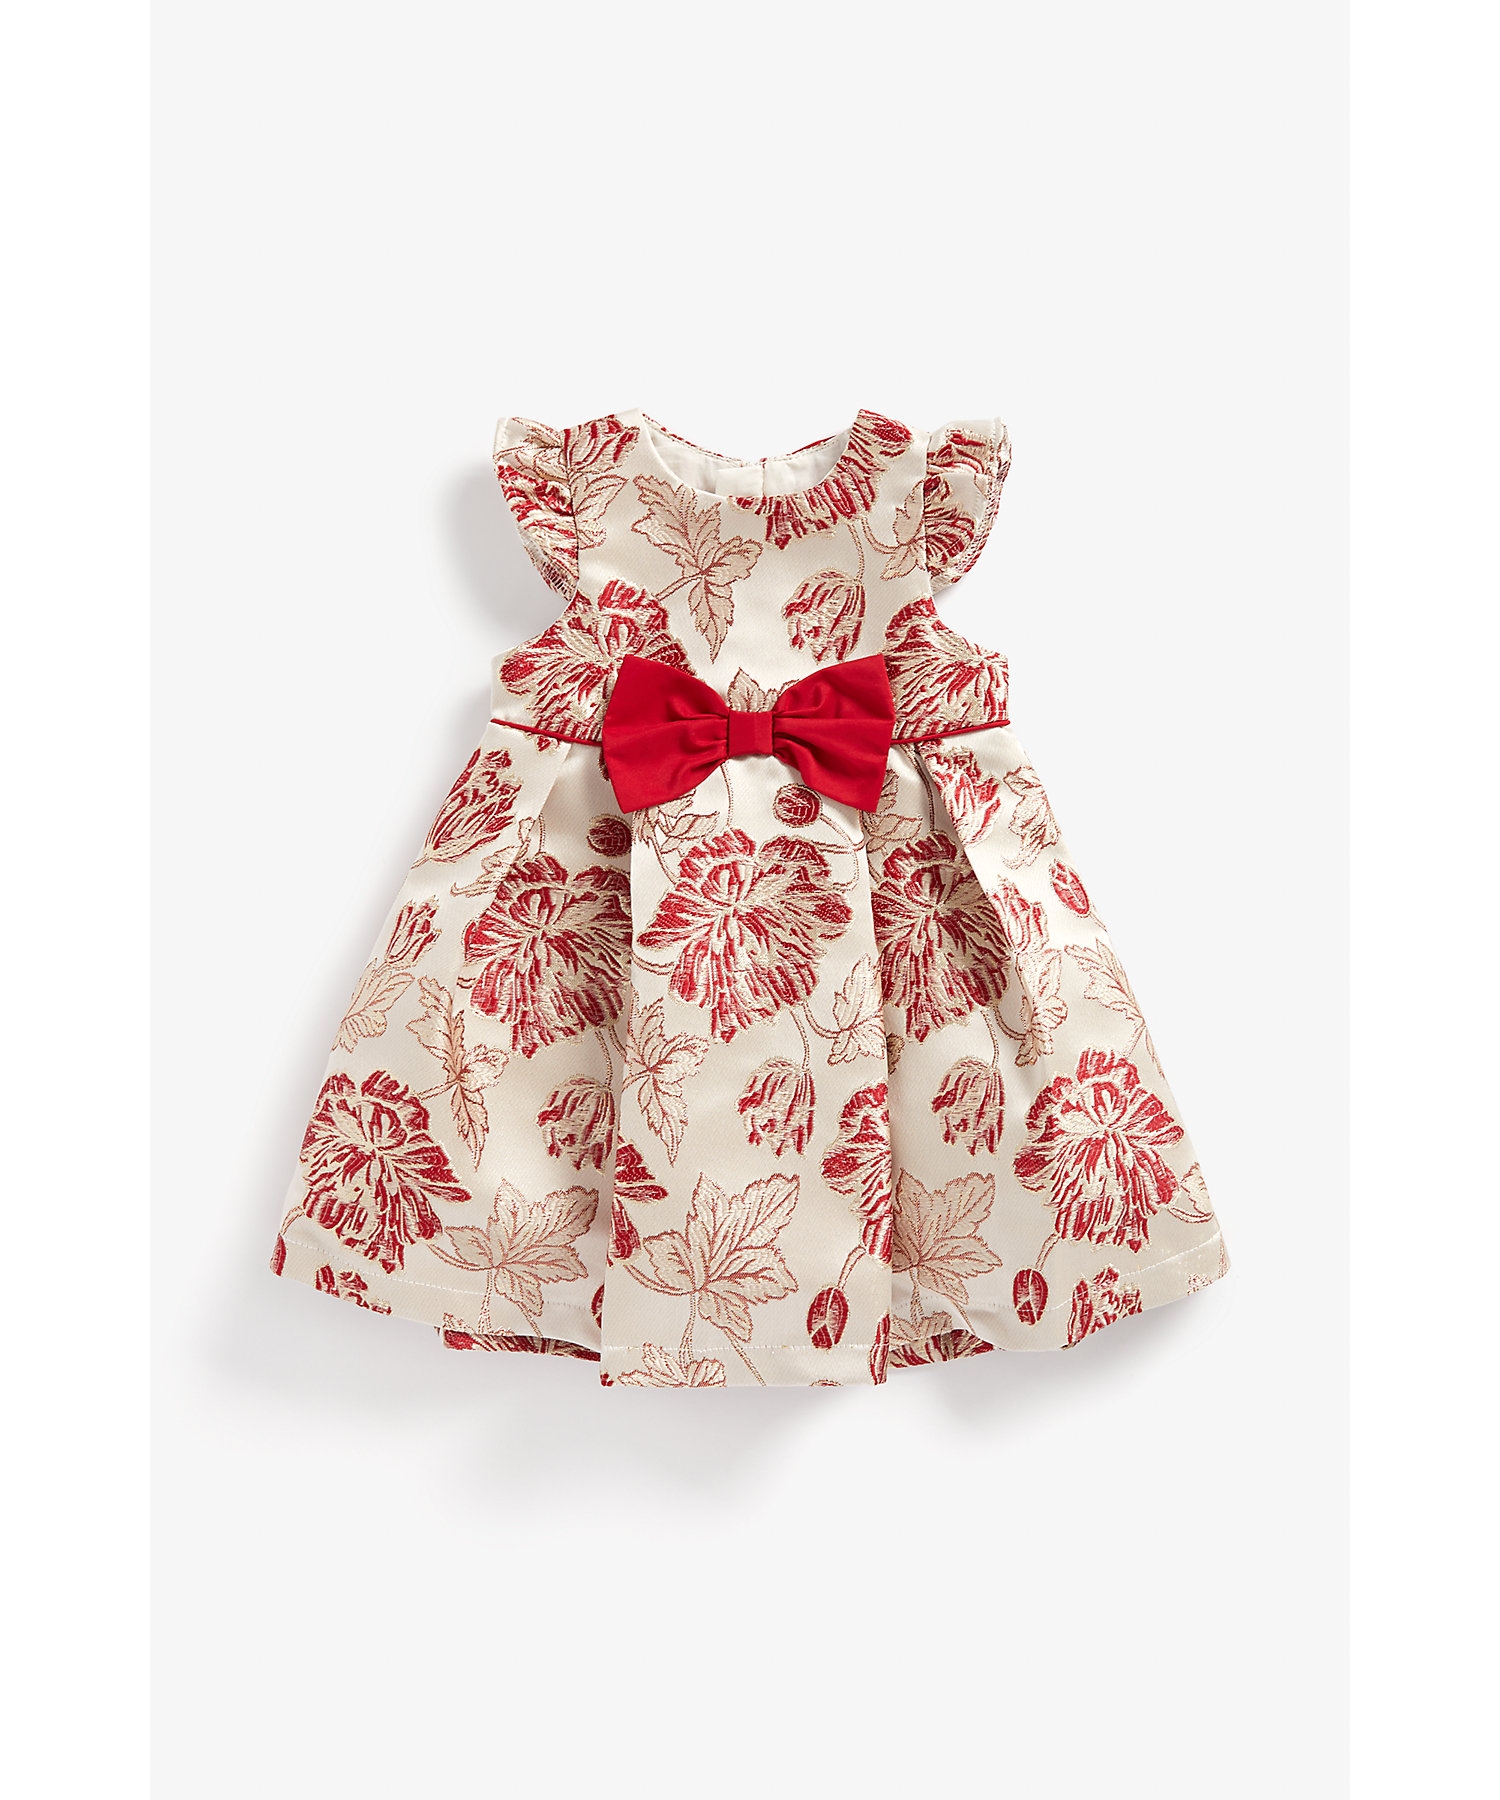 Girls Sleeveless Dress Floral Print With Bow Design-Multicolor